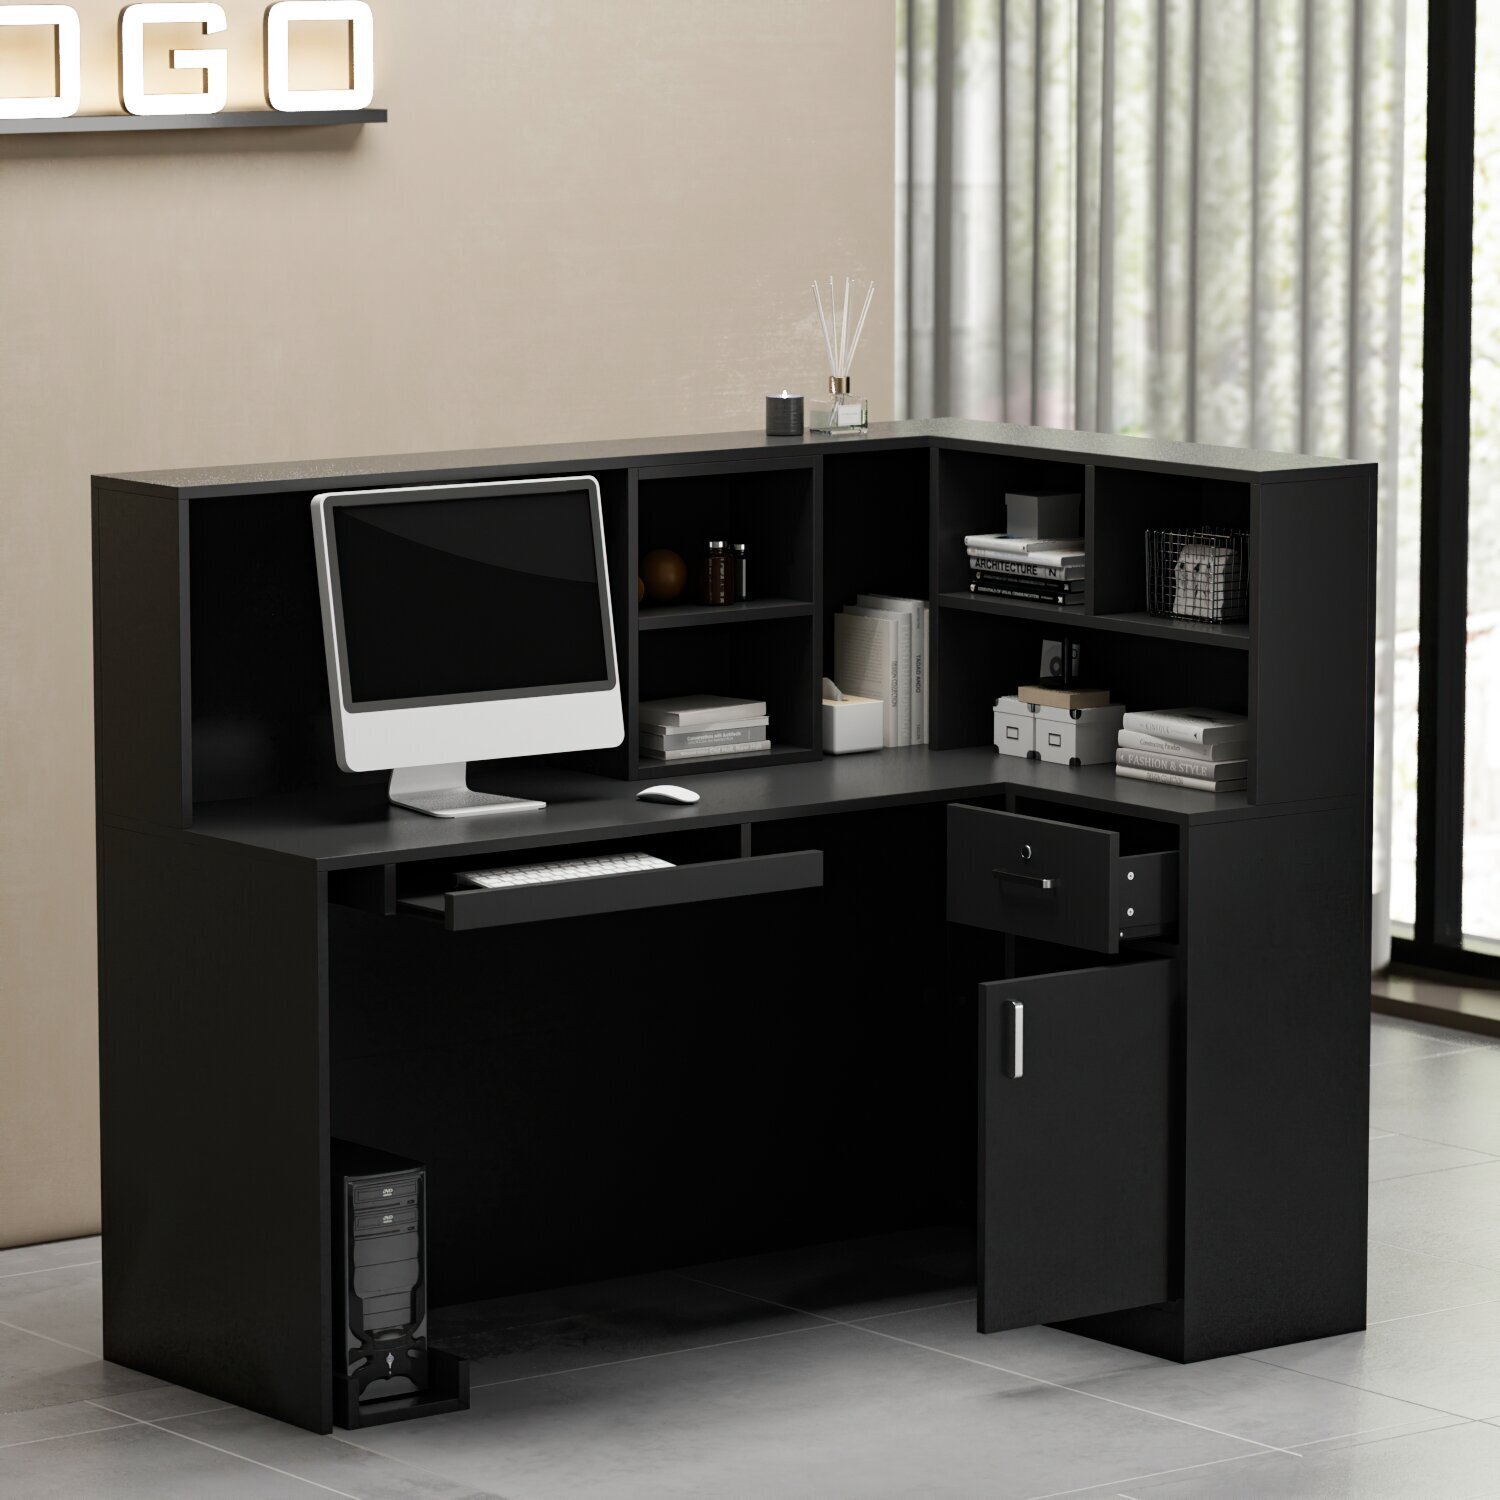 Black Reception Desk With Cupboard And Drawers 